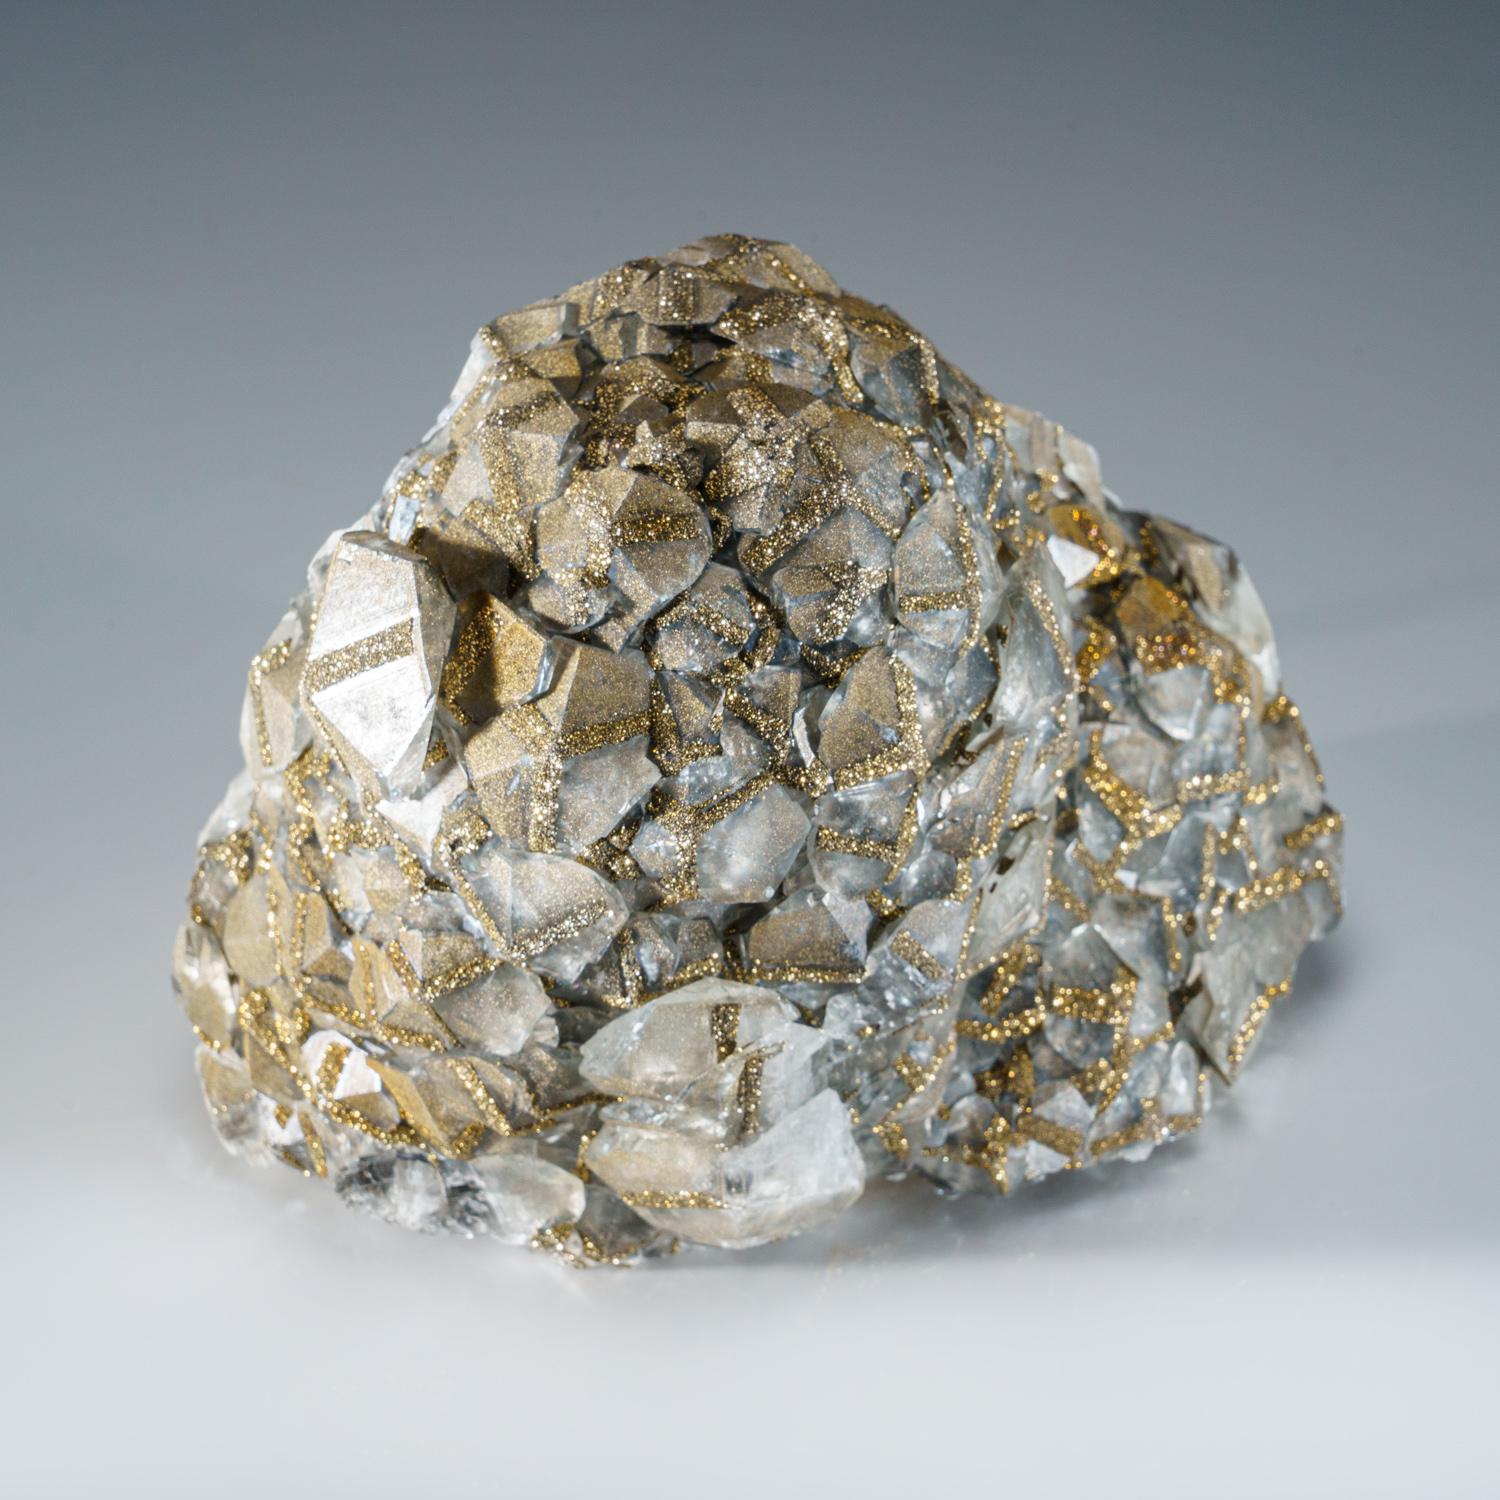 Chinese Mercedes Calcite with Pyrite Crystal Cluster from China For Sale